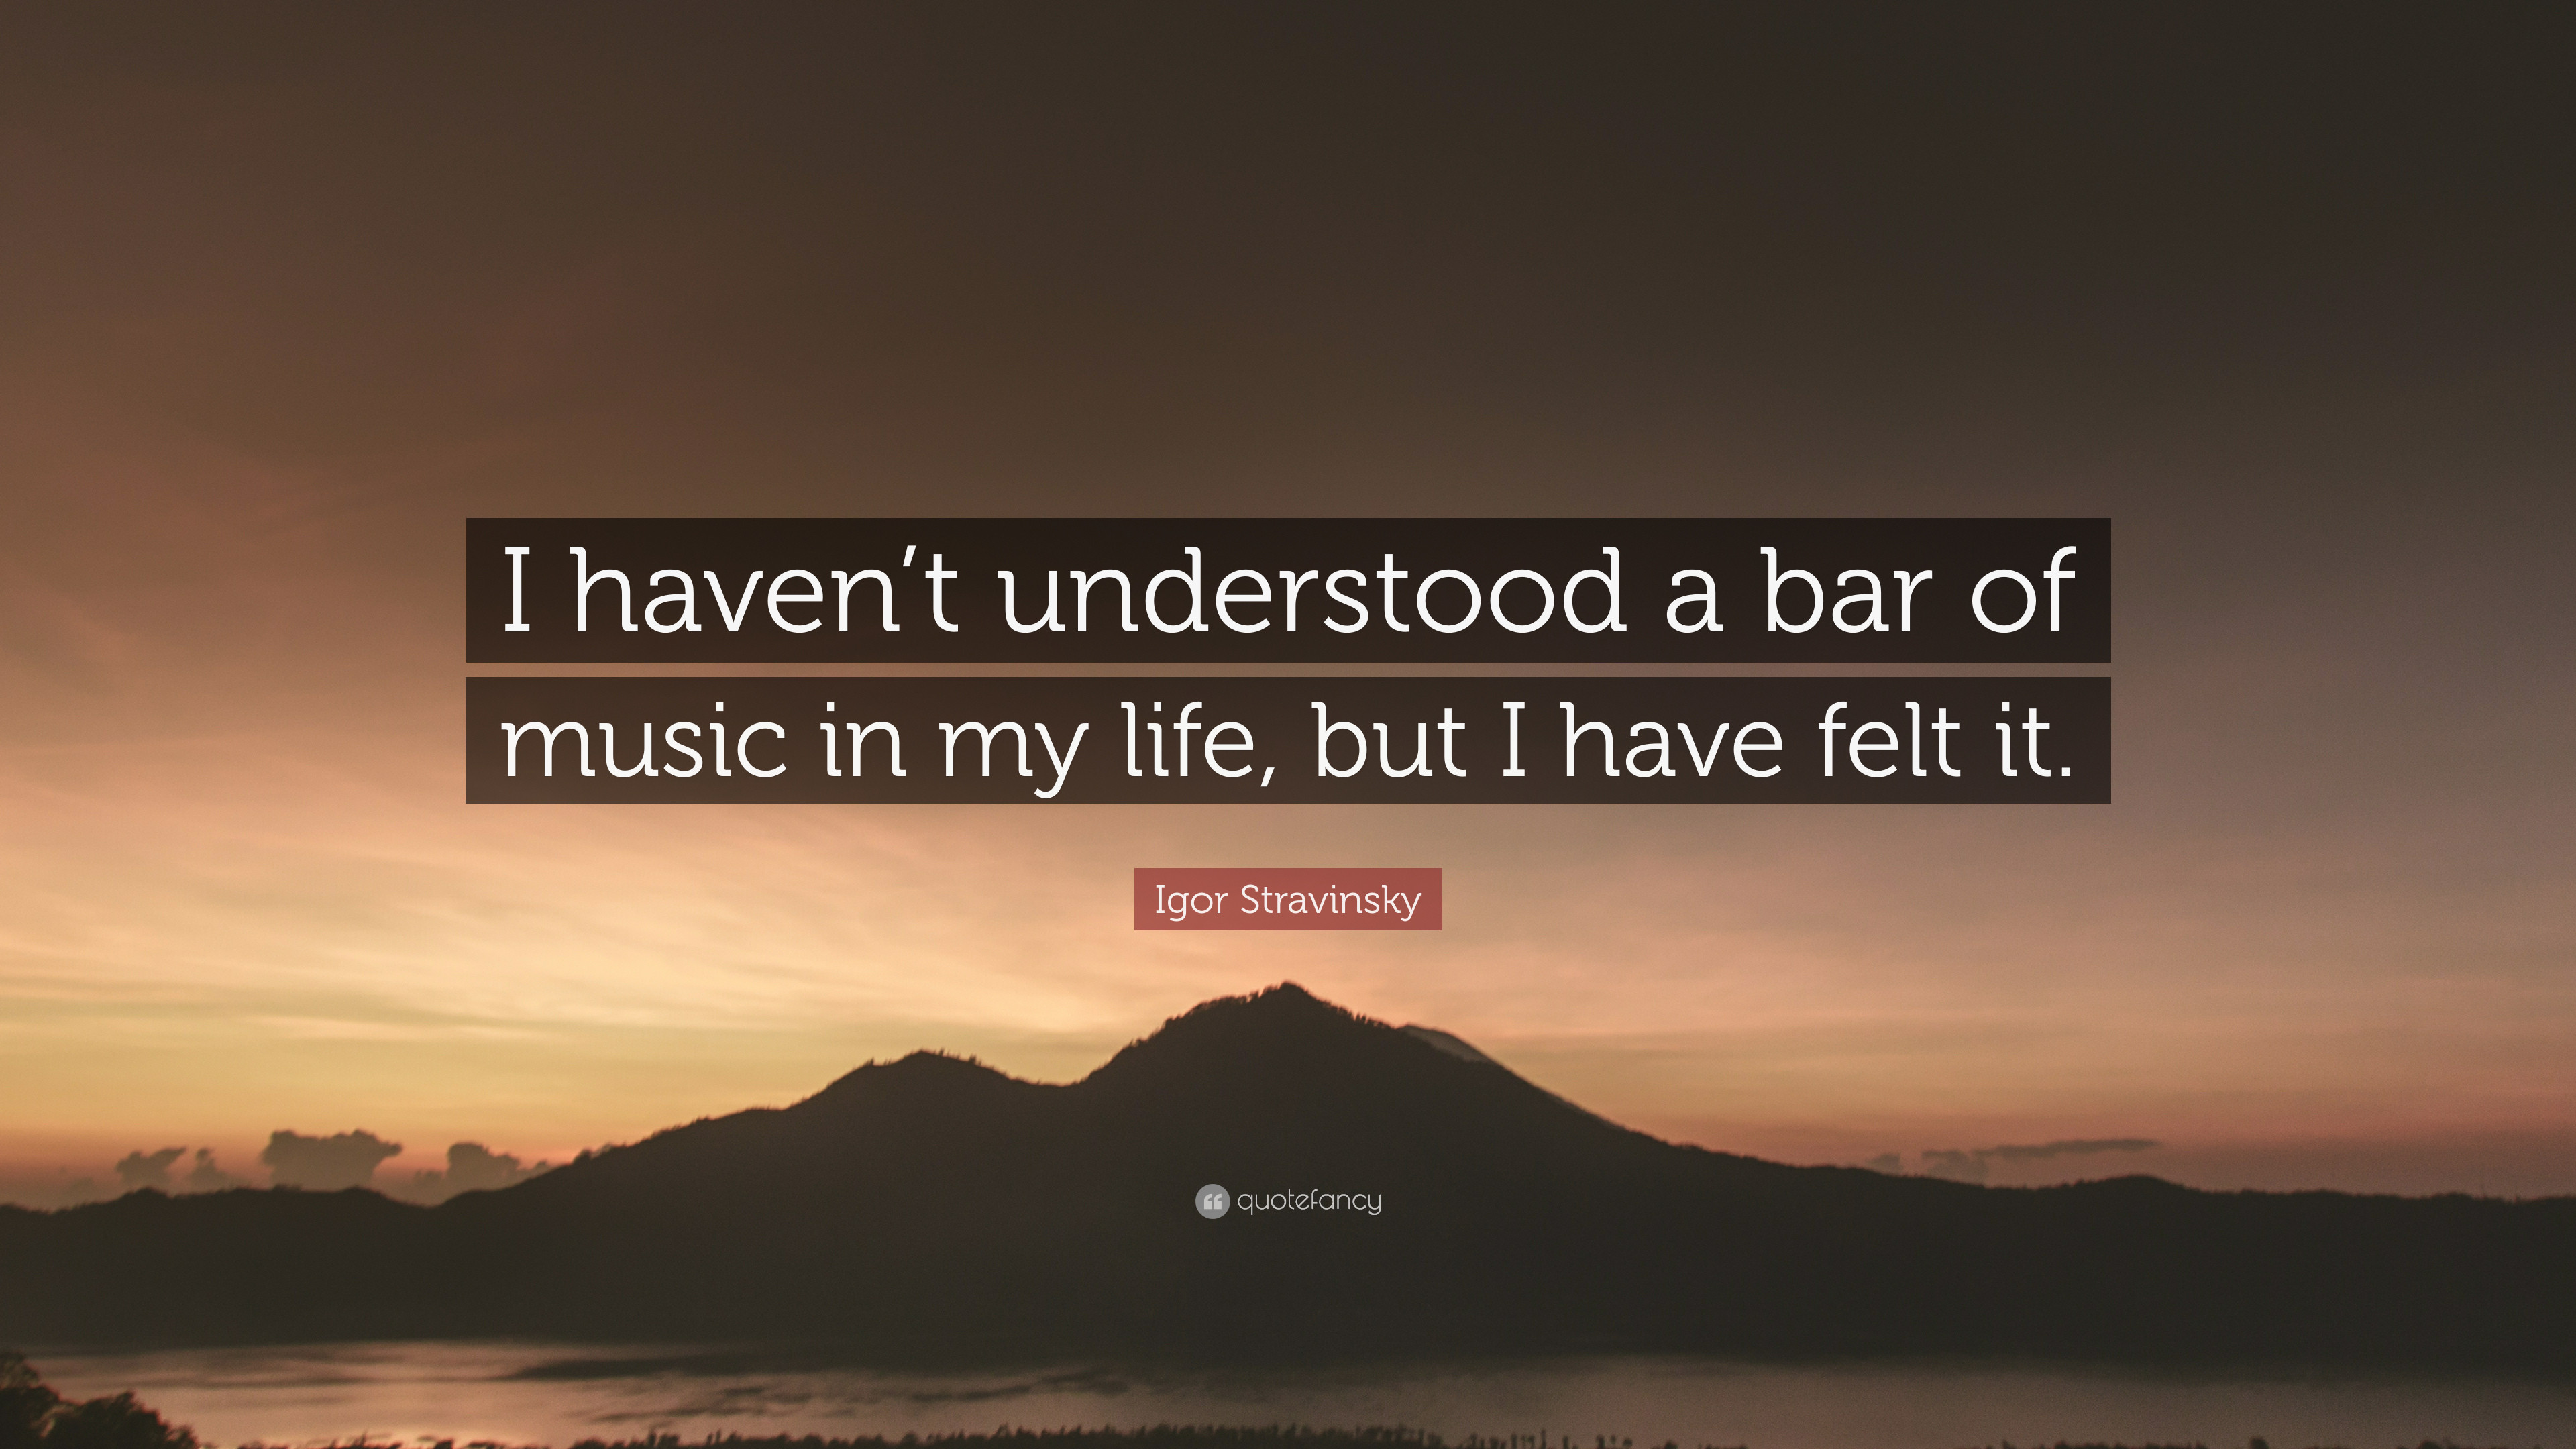 3840x2160 Igor Stravinsky Quote: “I haven't understood a bar of music in my